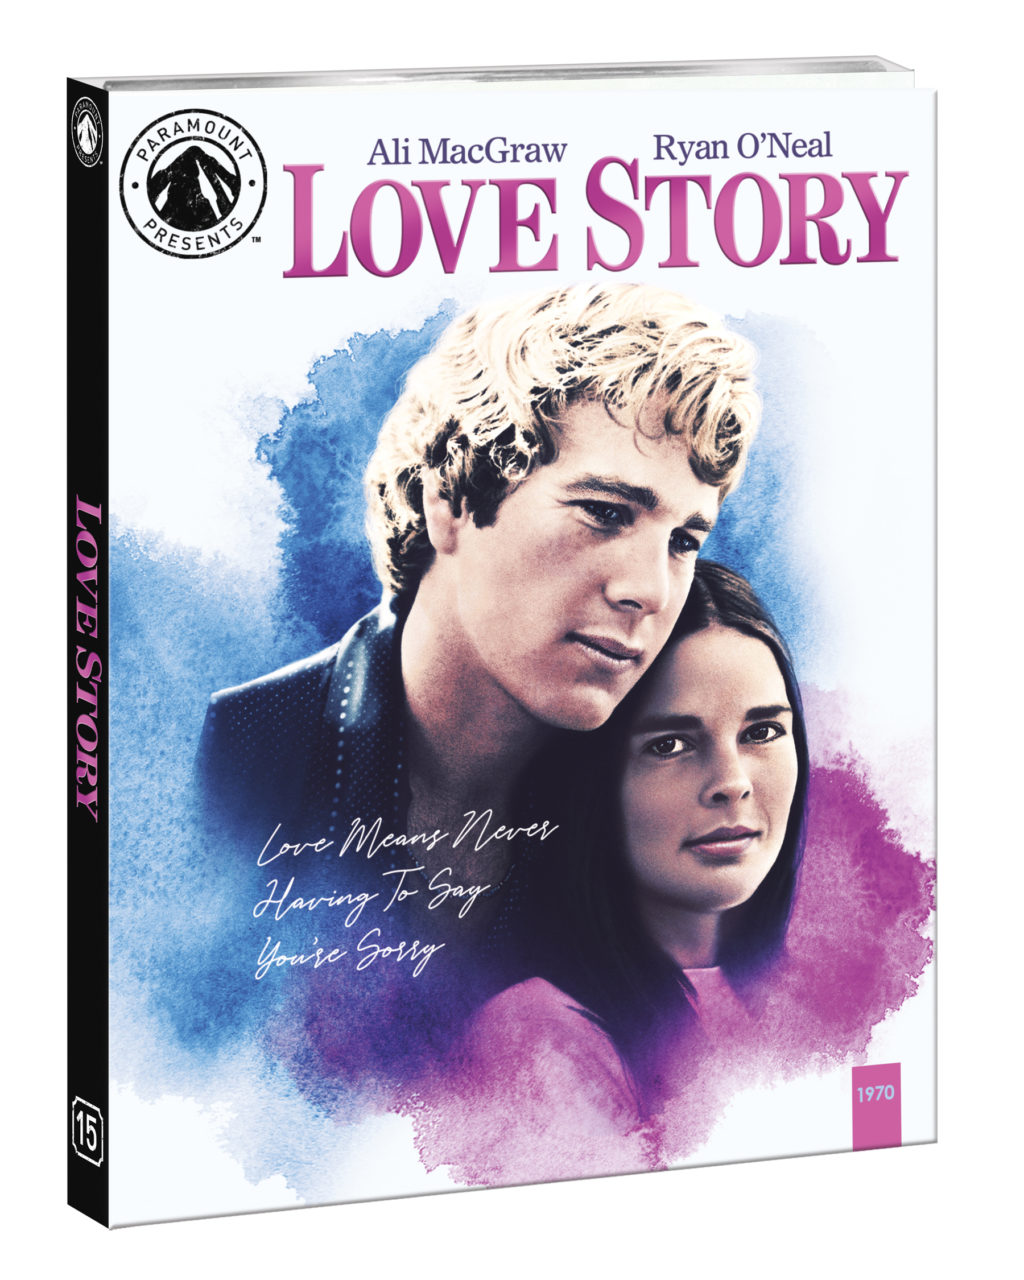 Love Story 50th Anniversary Blu-Ray Combo Pack cover (Paramount Home Entertainment/Paramount Presents)